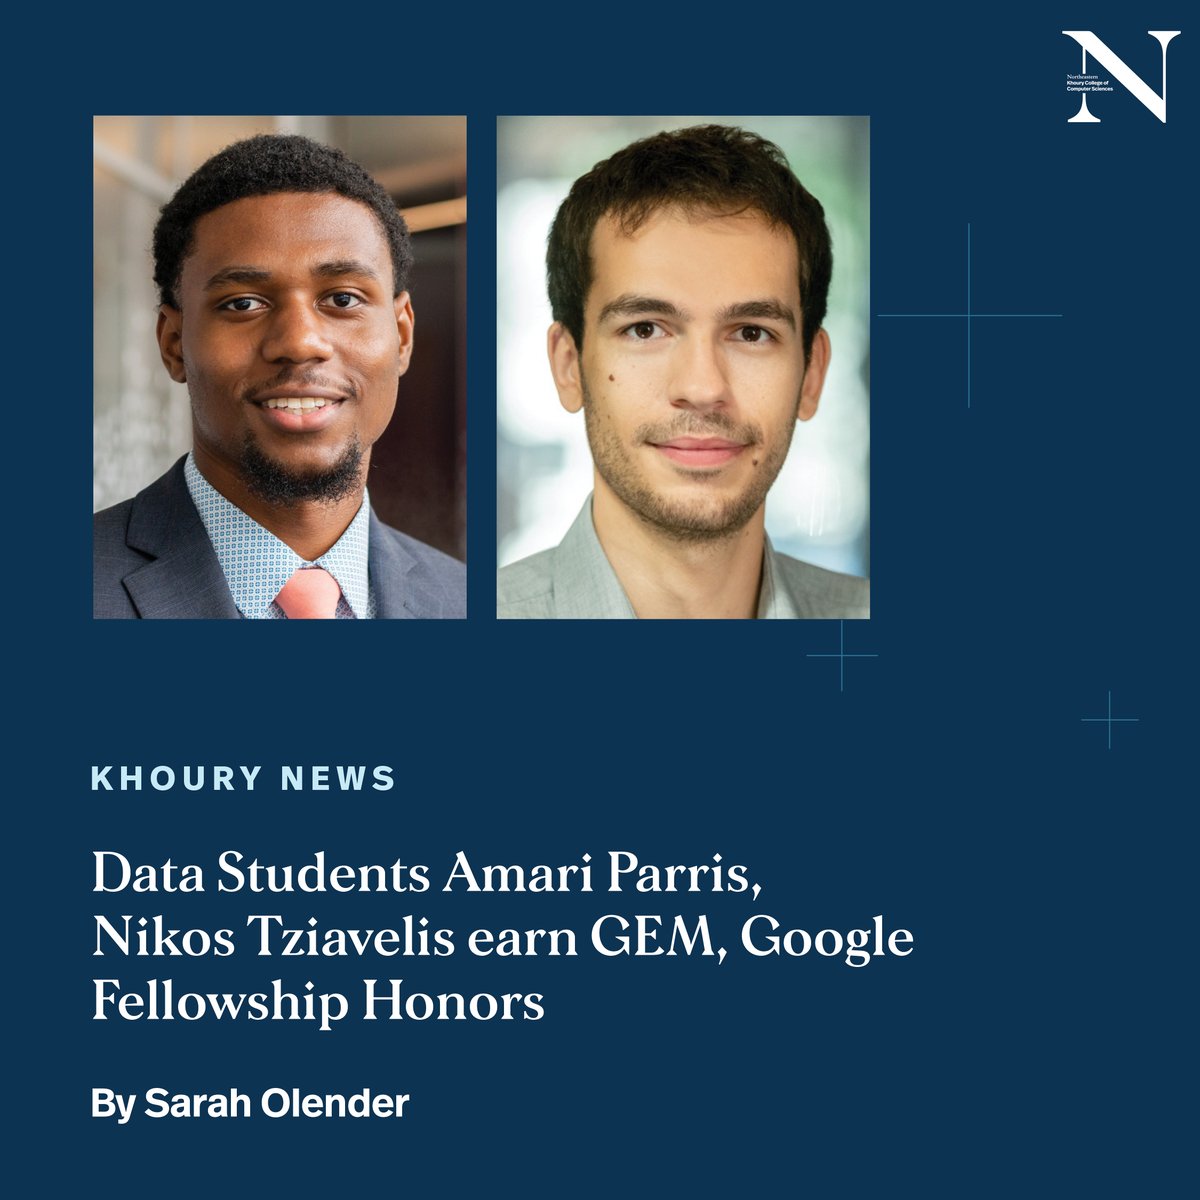 Amari Parris came to Khoury College from a kinesiology background. Nikos Tziavelis came from his native Greece, where he studied engineering. Now, the pair have added momentum to their data science journeys through prestigious fellowships. Read more here: bit.ly/3MdGLRs